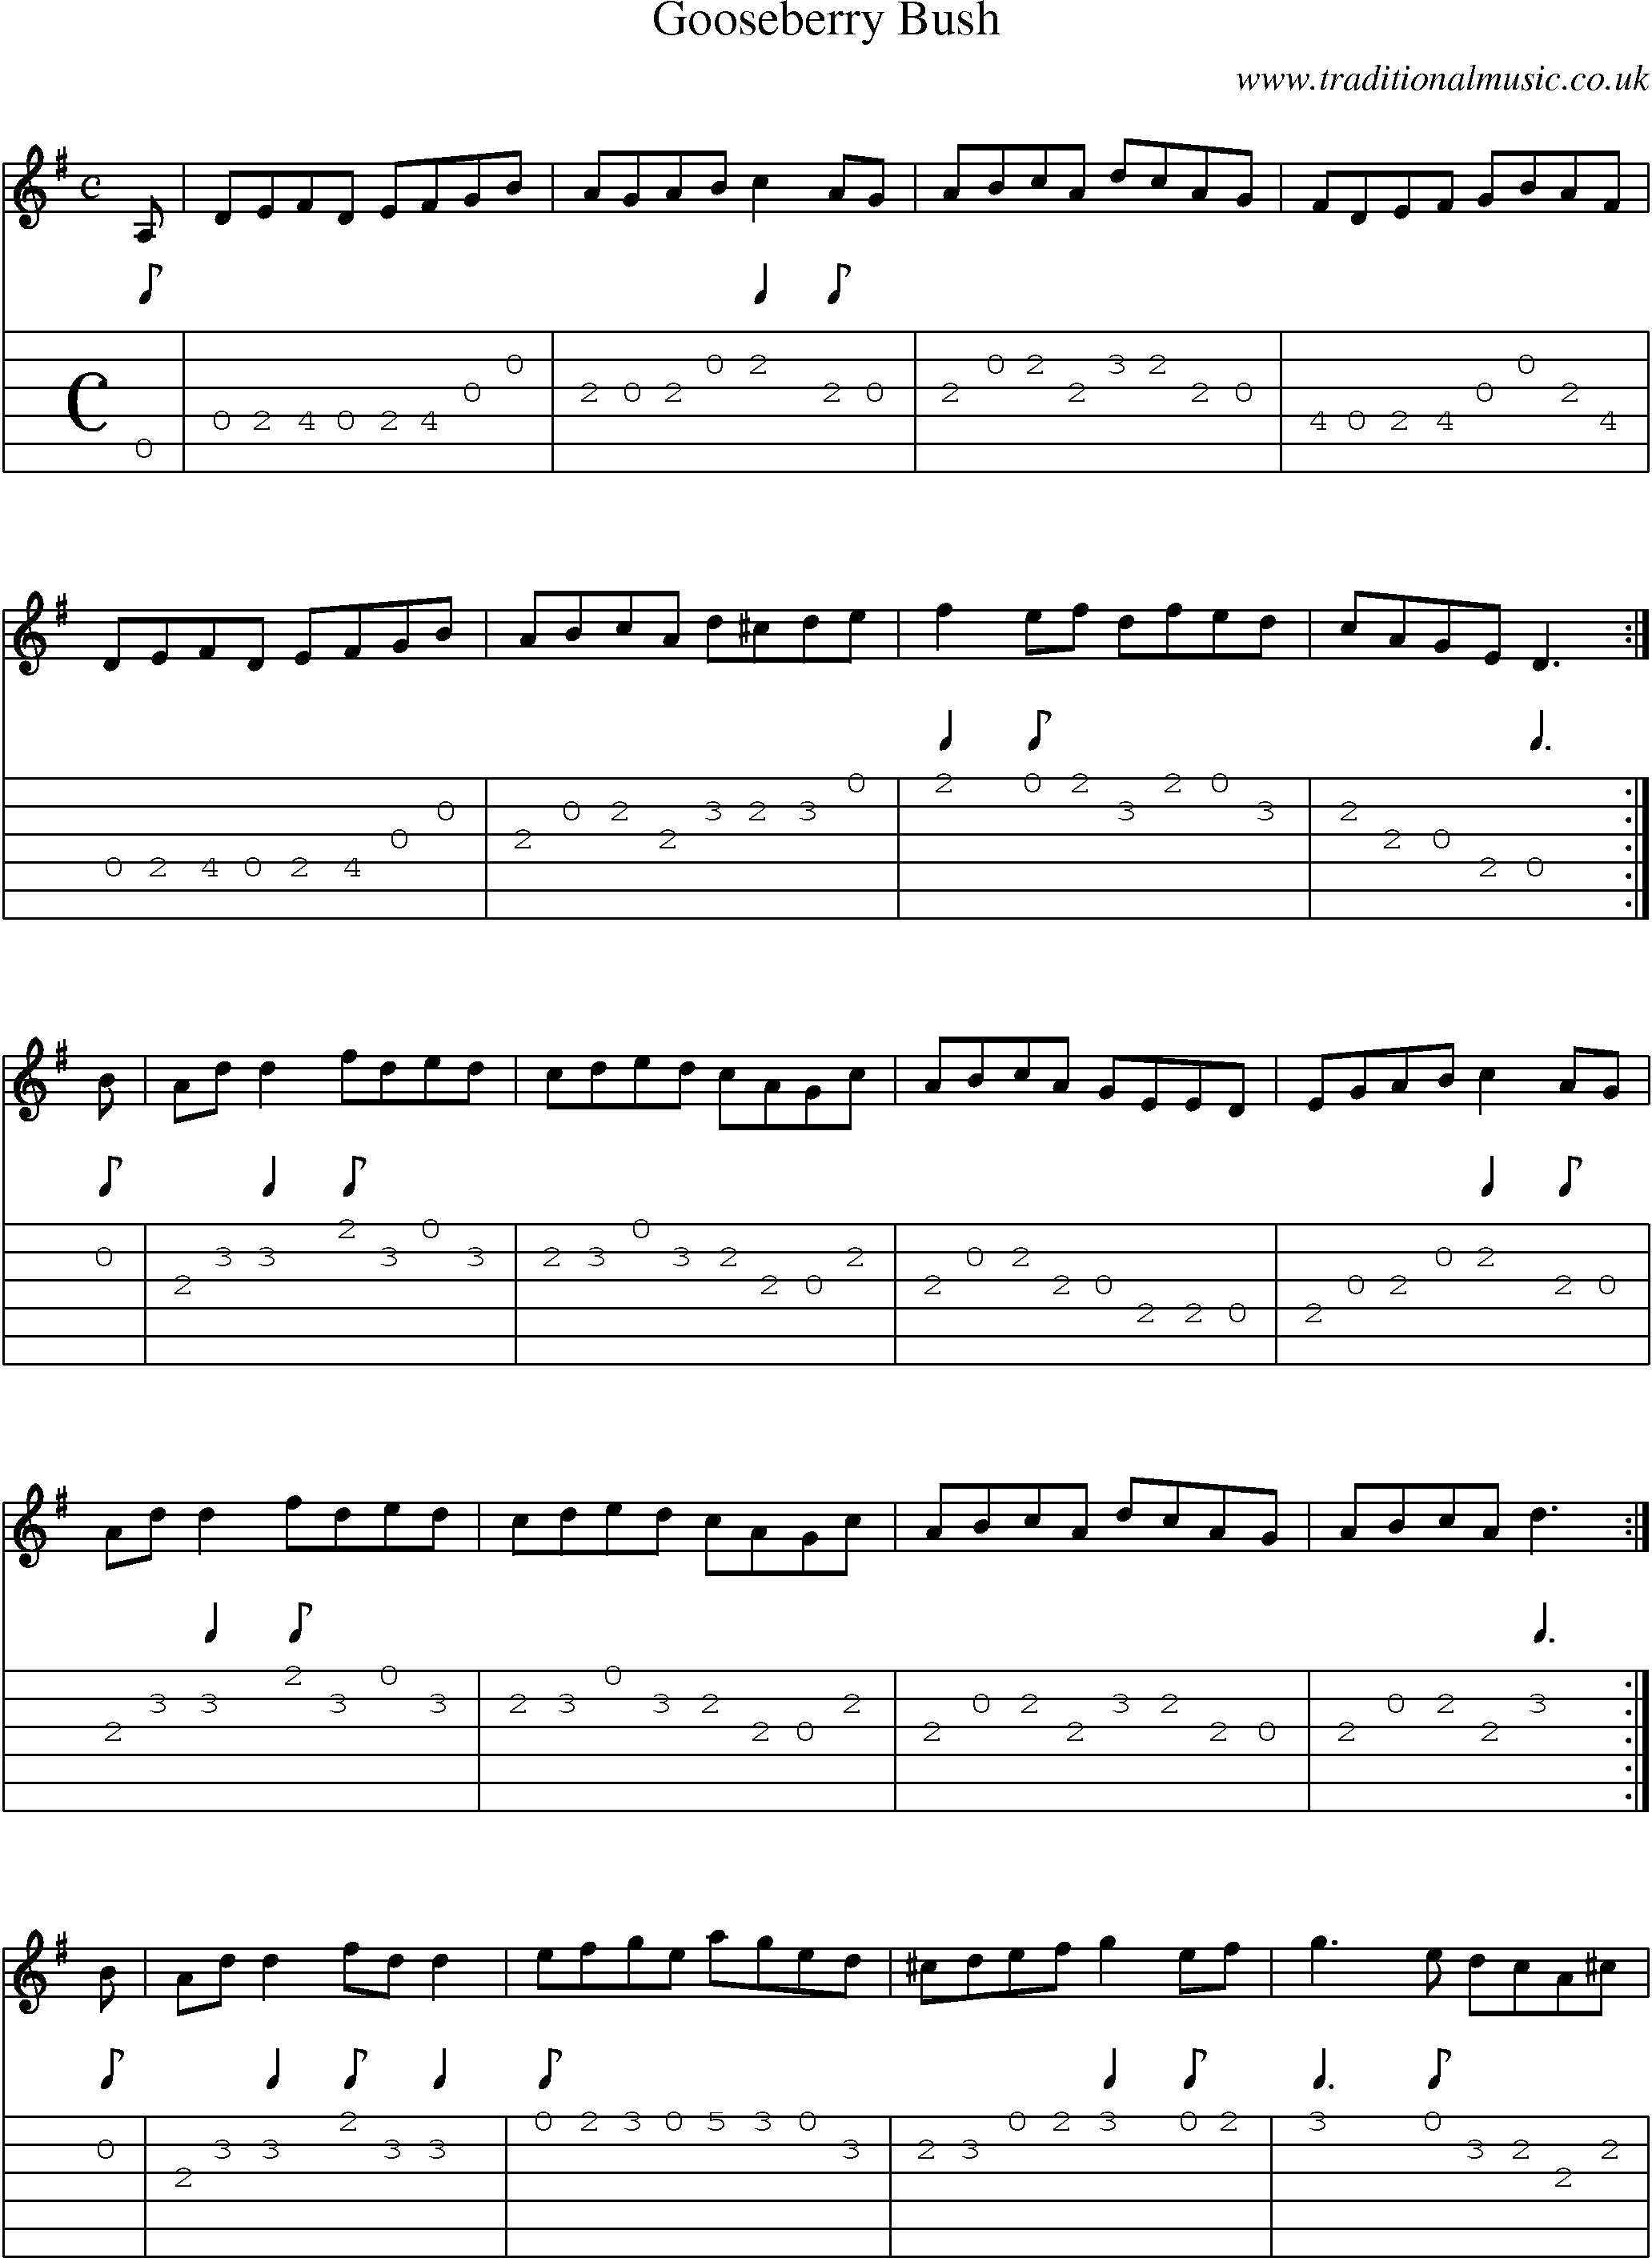 Music Score and Guitar Tabs for Gooseberry Bush